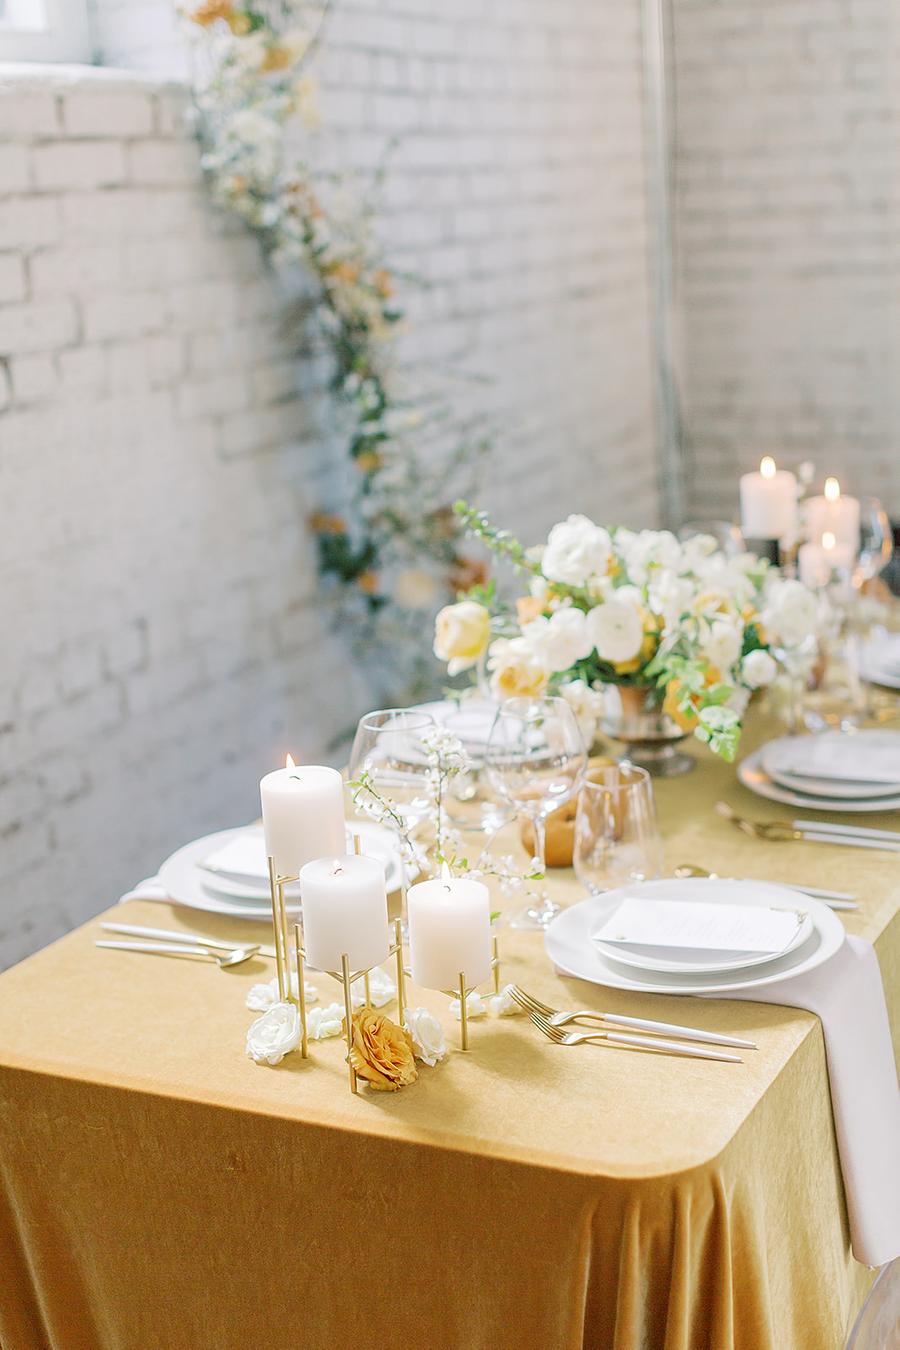 The wedding table setting was done with mustard linens, neutral and mustard blooms and pillar candles